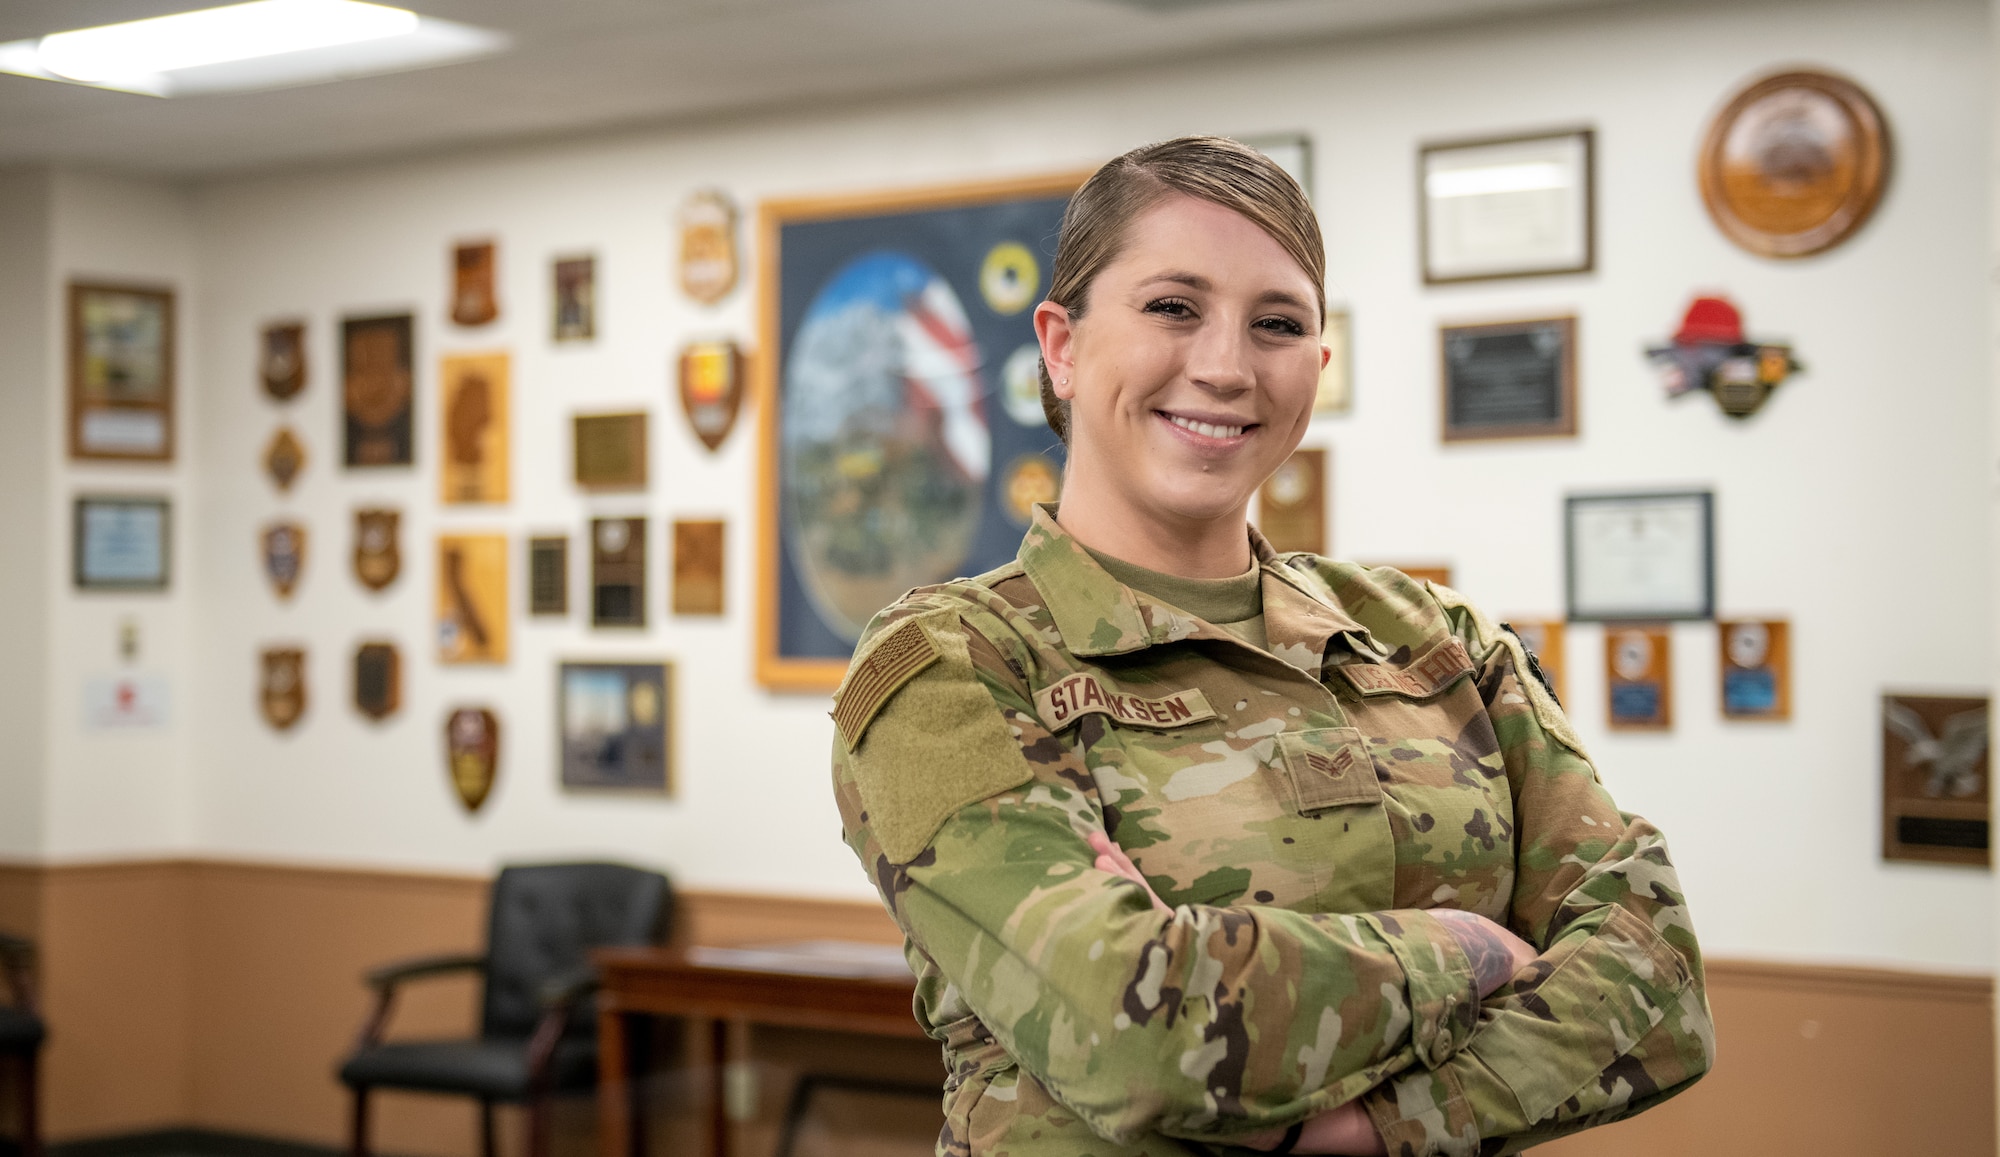 U.S. Air Force Senior Airman Mikayla Starksen, a material control operations manager for the 419th Civil Engineer Squadron, poses for a photo May 1, 2021 at Hill Air Force Base, Utah.